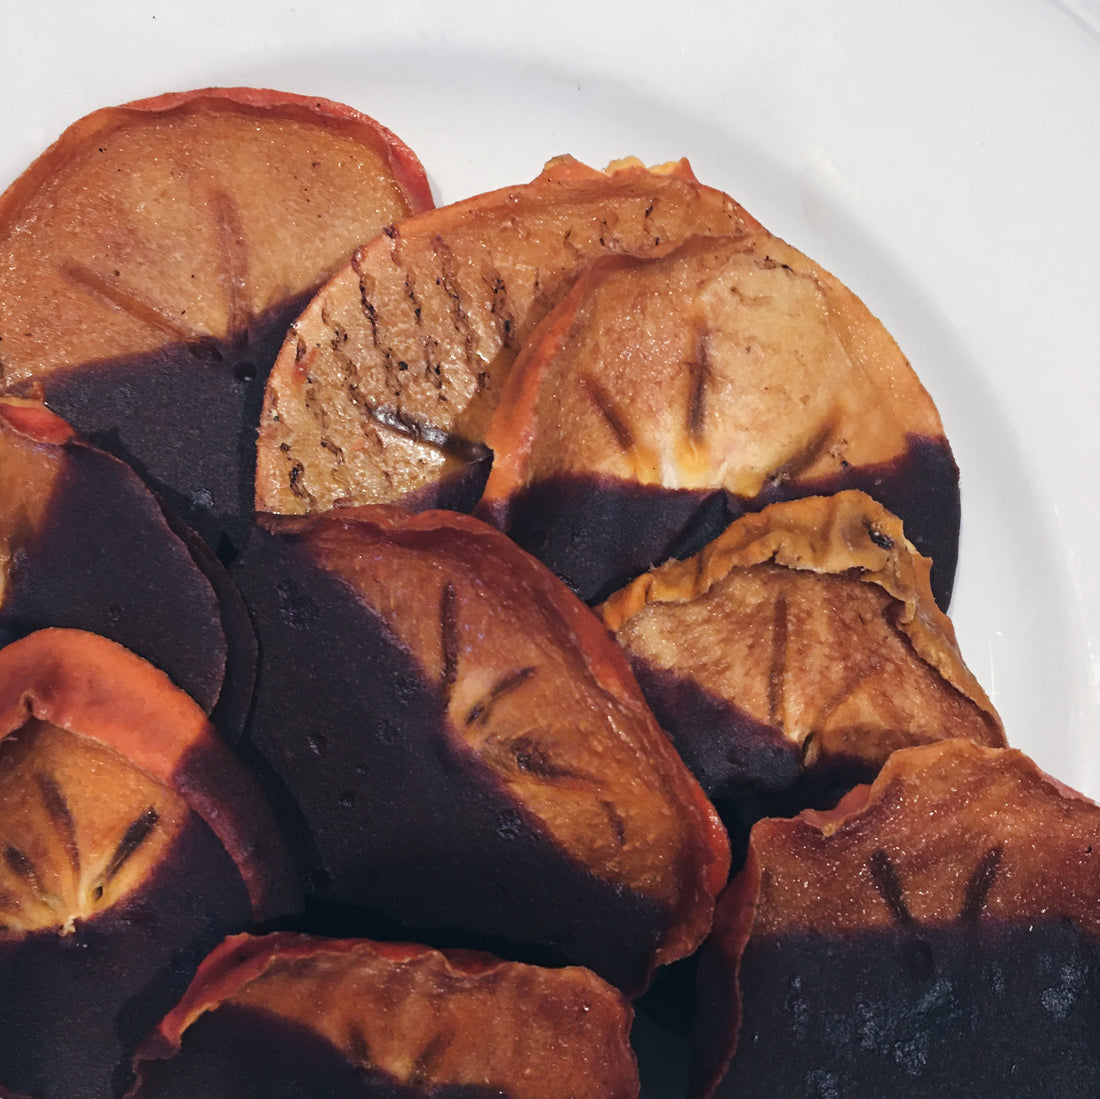 Chocolate Covered Persimmons